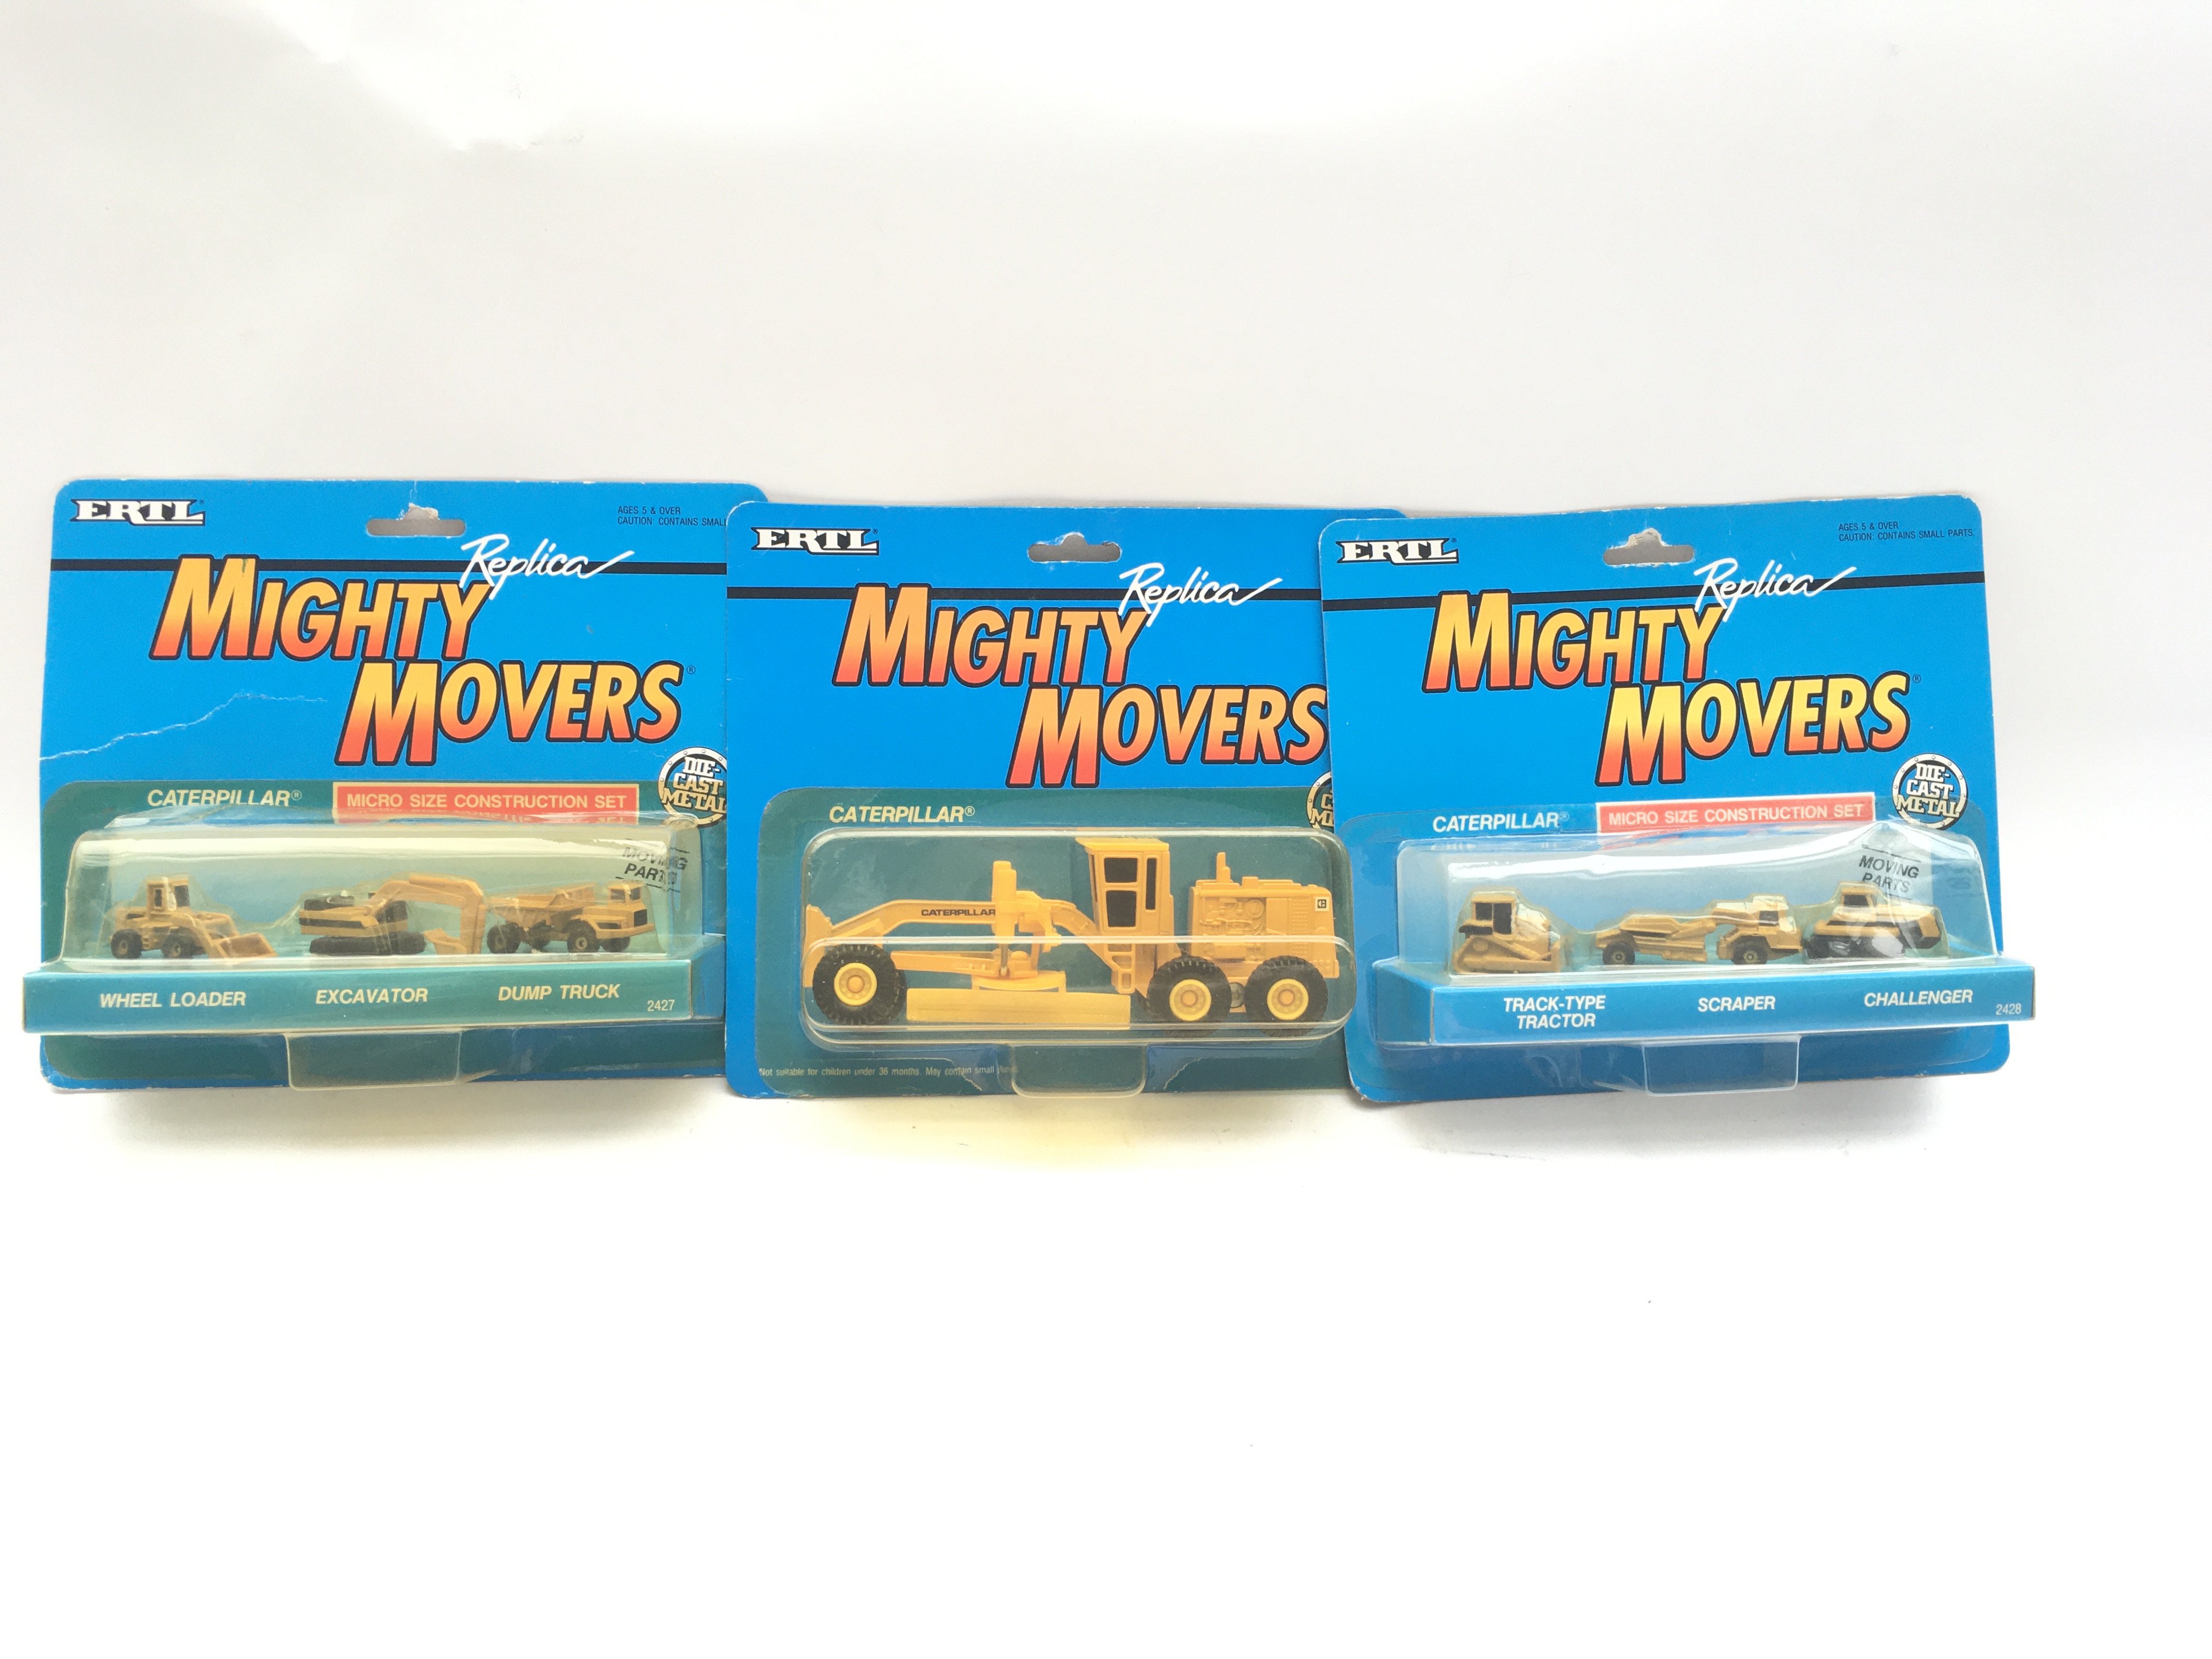 Collection of Die-Cast vehicles. Might Movers. Caterpillar. Boxed/Sealed.